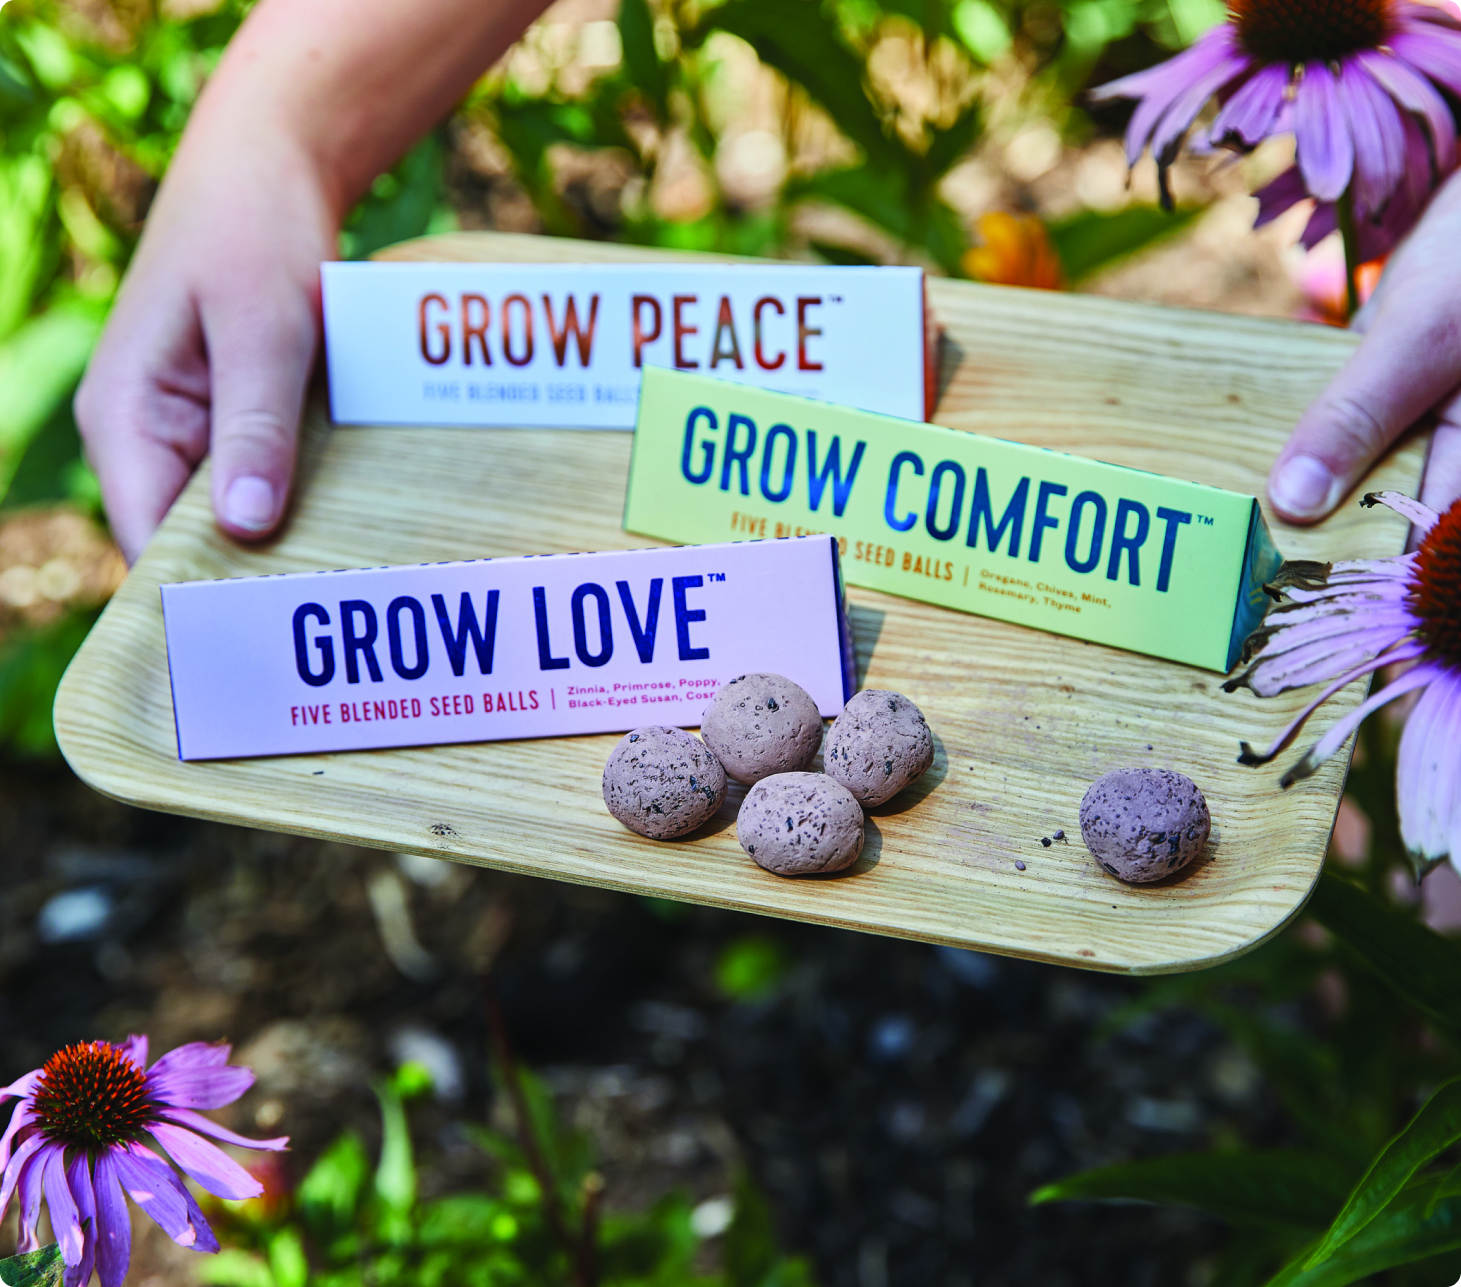 MODERN SPROUT® BRIGHT SIDE SEED BALLS